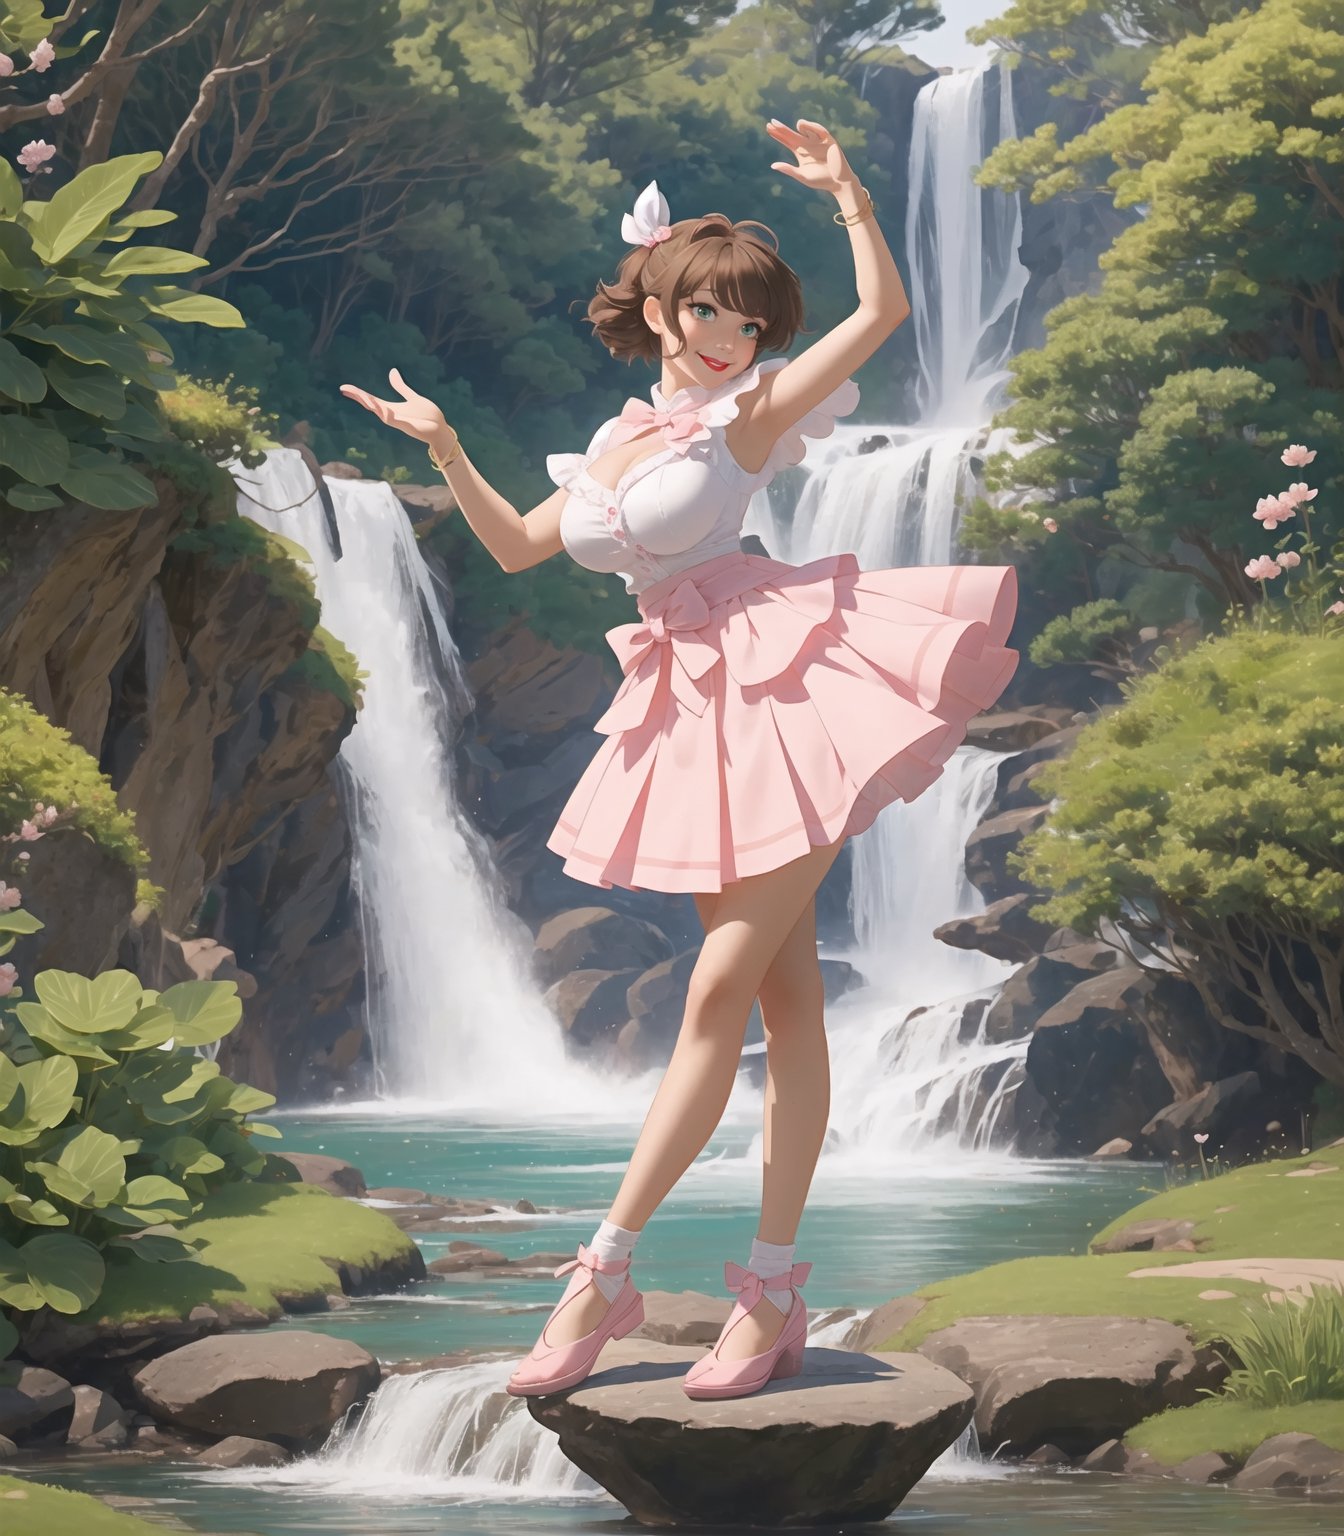 Masterpiece in maximum 16K resolution, in a style inspired by the anime Sakura_Card_Captor. | Sakura_Kinomoto, now 30 years old, displays all her maturity and magical power in a stunning all-white mage outfit adorned with pink details. Her short accordion skirt, white stockings with pink bands, and pink shoes complement the harmony of the look. We cannot help but highlight her gigantic_breasts, which are an intrinsic part of her unique beauty. | The scene unfolds in an ancient temple near a majestic waterfall, featuring white marble structures, altars with ancient writings, and a variety of spirit animals. Sakura is looking directly at the viewer, her green eyes radiating confidence as she offers a captivating smile. Her short brown hair with a large fringe in front of her right eye adds a contemporary touch to her image. The white beret with a pink band and golden accessories, including a golden star in the center, further enhances her magical presence. | The visual composition highlights the magic in the air, with appropriate lighting emphasizing the details of the outfit and the enchanted environment. | Sakura Kinomoto, at 30 years old, in a mage outfit inspired by Card Captor Sakura, displaying her gigantic_breasts in a mystical setting of an ancient temple next to a waterfall. | {The camera is positioned very close to her, revealing her entire body as she adopts a sensual_pose, interacting with and leaning on a structure in the scene in an exciting way.} | She is adopting a ((sensual_pose as interacts, boldly leaning on a structure, leaning back in an exciting way):1.3), ((perfect_pose), ((perfect_pose):1.5), (((full body))), ((perfect_fingers, hands, better_hands, perfect_hands, perfect_legs)), ((perfect_fingers, perfect_hands, perfect_legs):0.7), gigantic_breasts, (fingers, hand, perfect), More Detail,anime